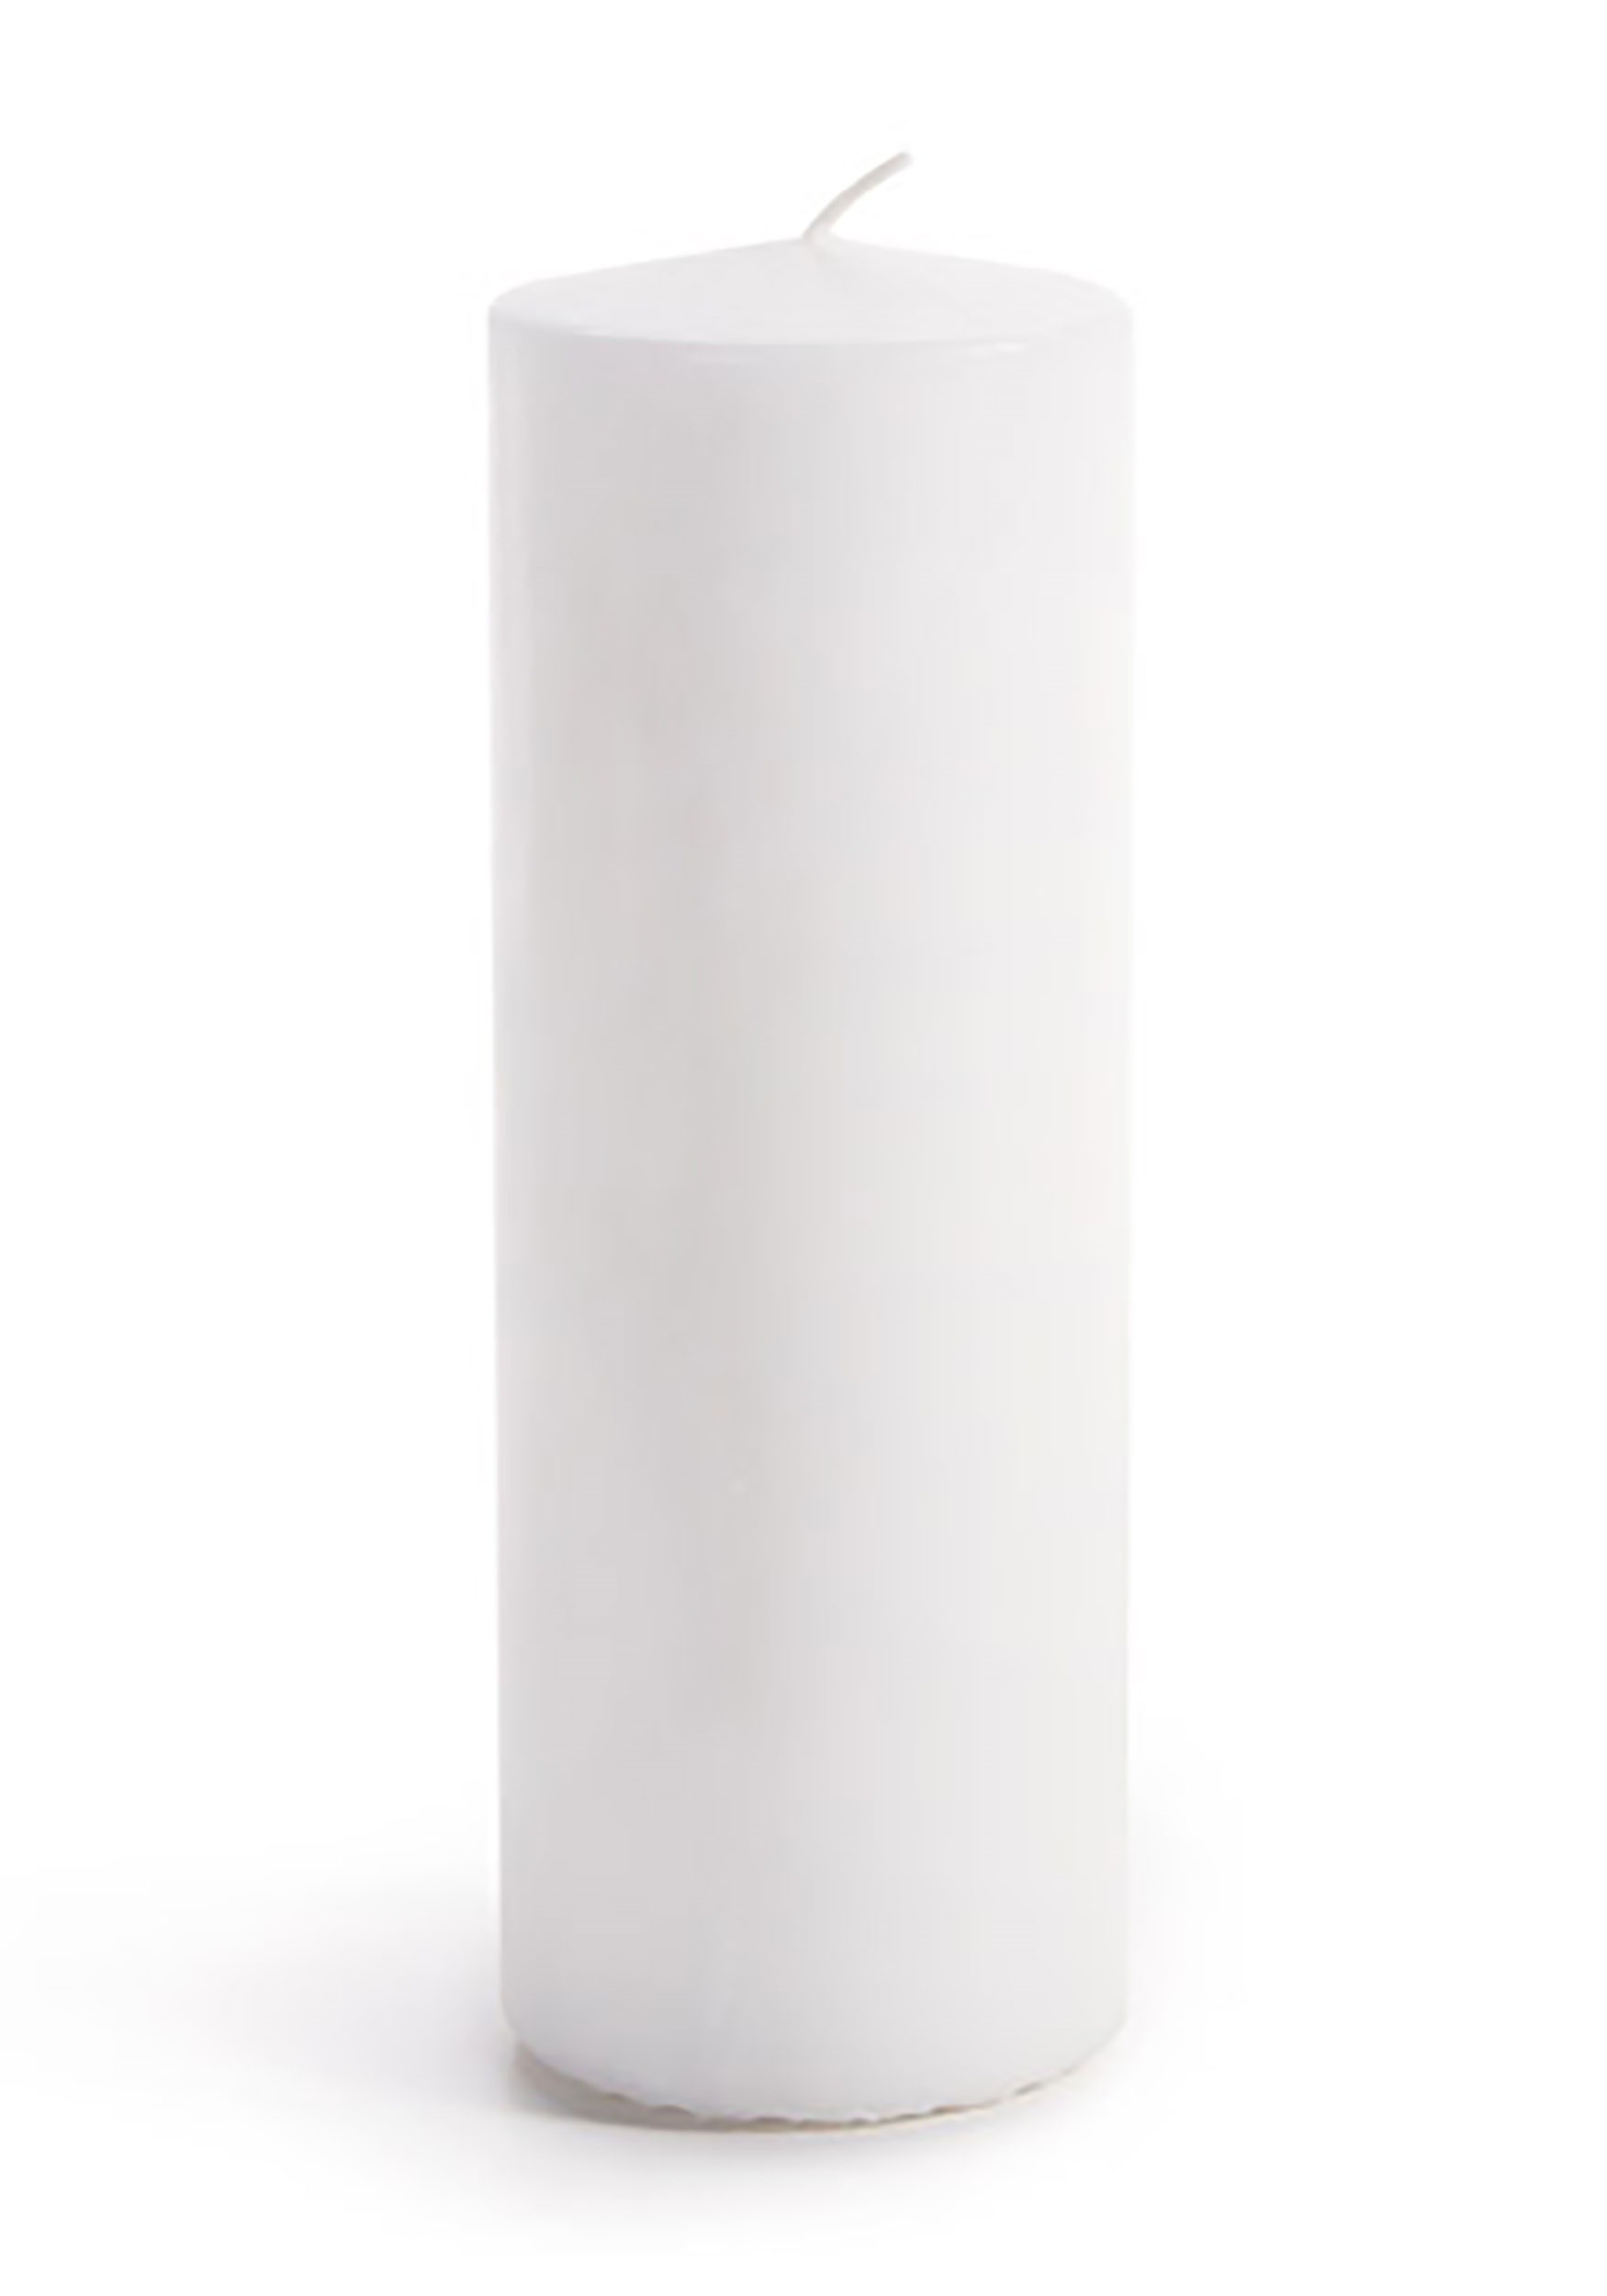 Set of 3 Unscented White Pillar Candles